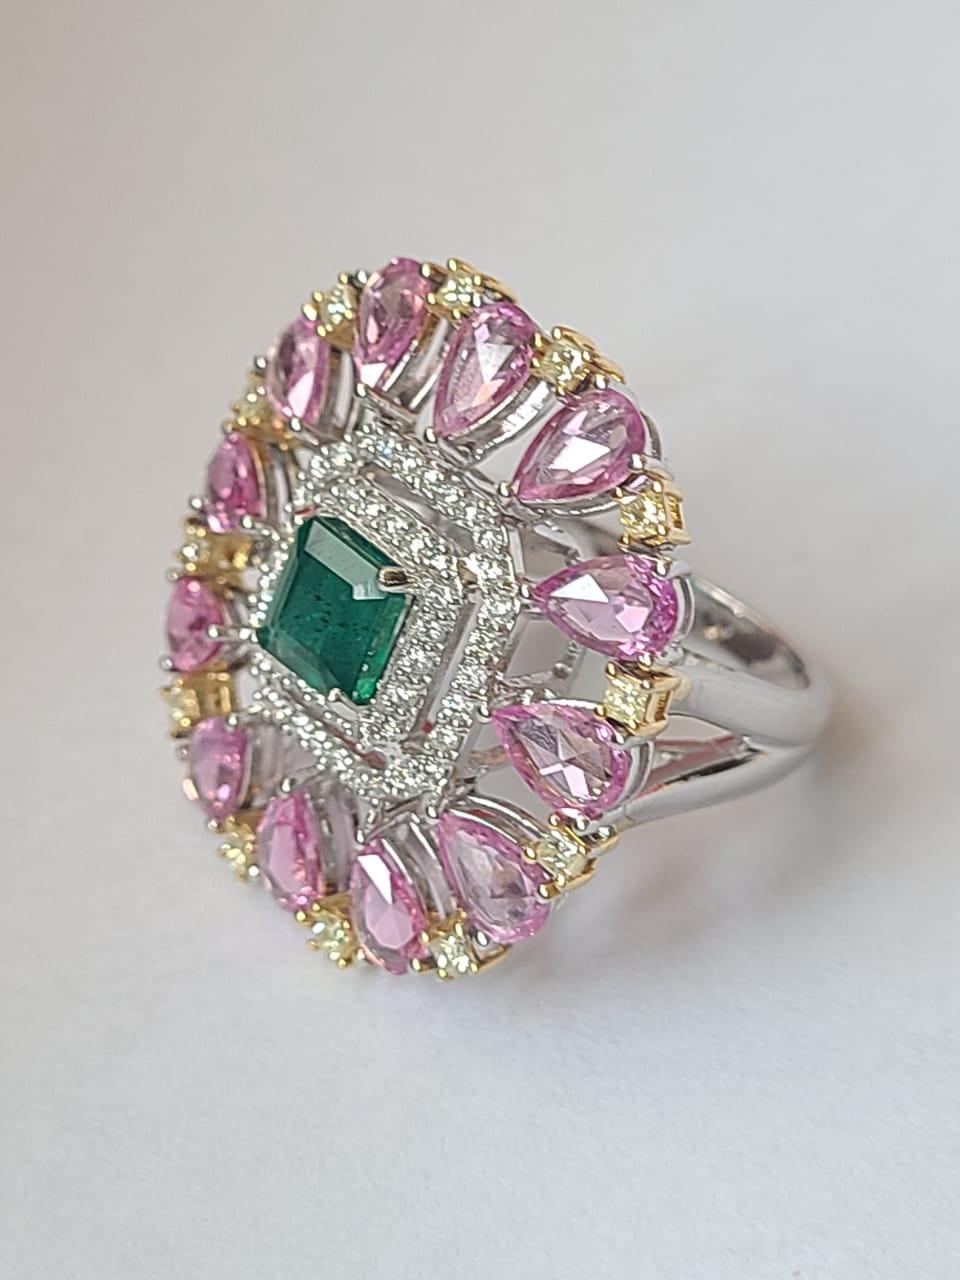 A very gorgeous and one of a kind, Emerald & Pink Sapphires Cocktail Ring set in 18K White Gold & Diamonds. The weight of the Emerald is 1.20 carats. The Emerald is completely natural, without any treatment and is of Zambian origin. The weight of